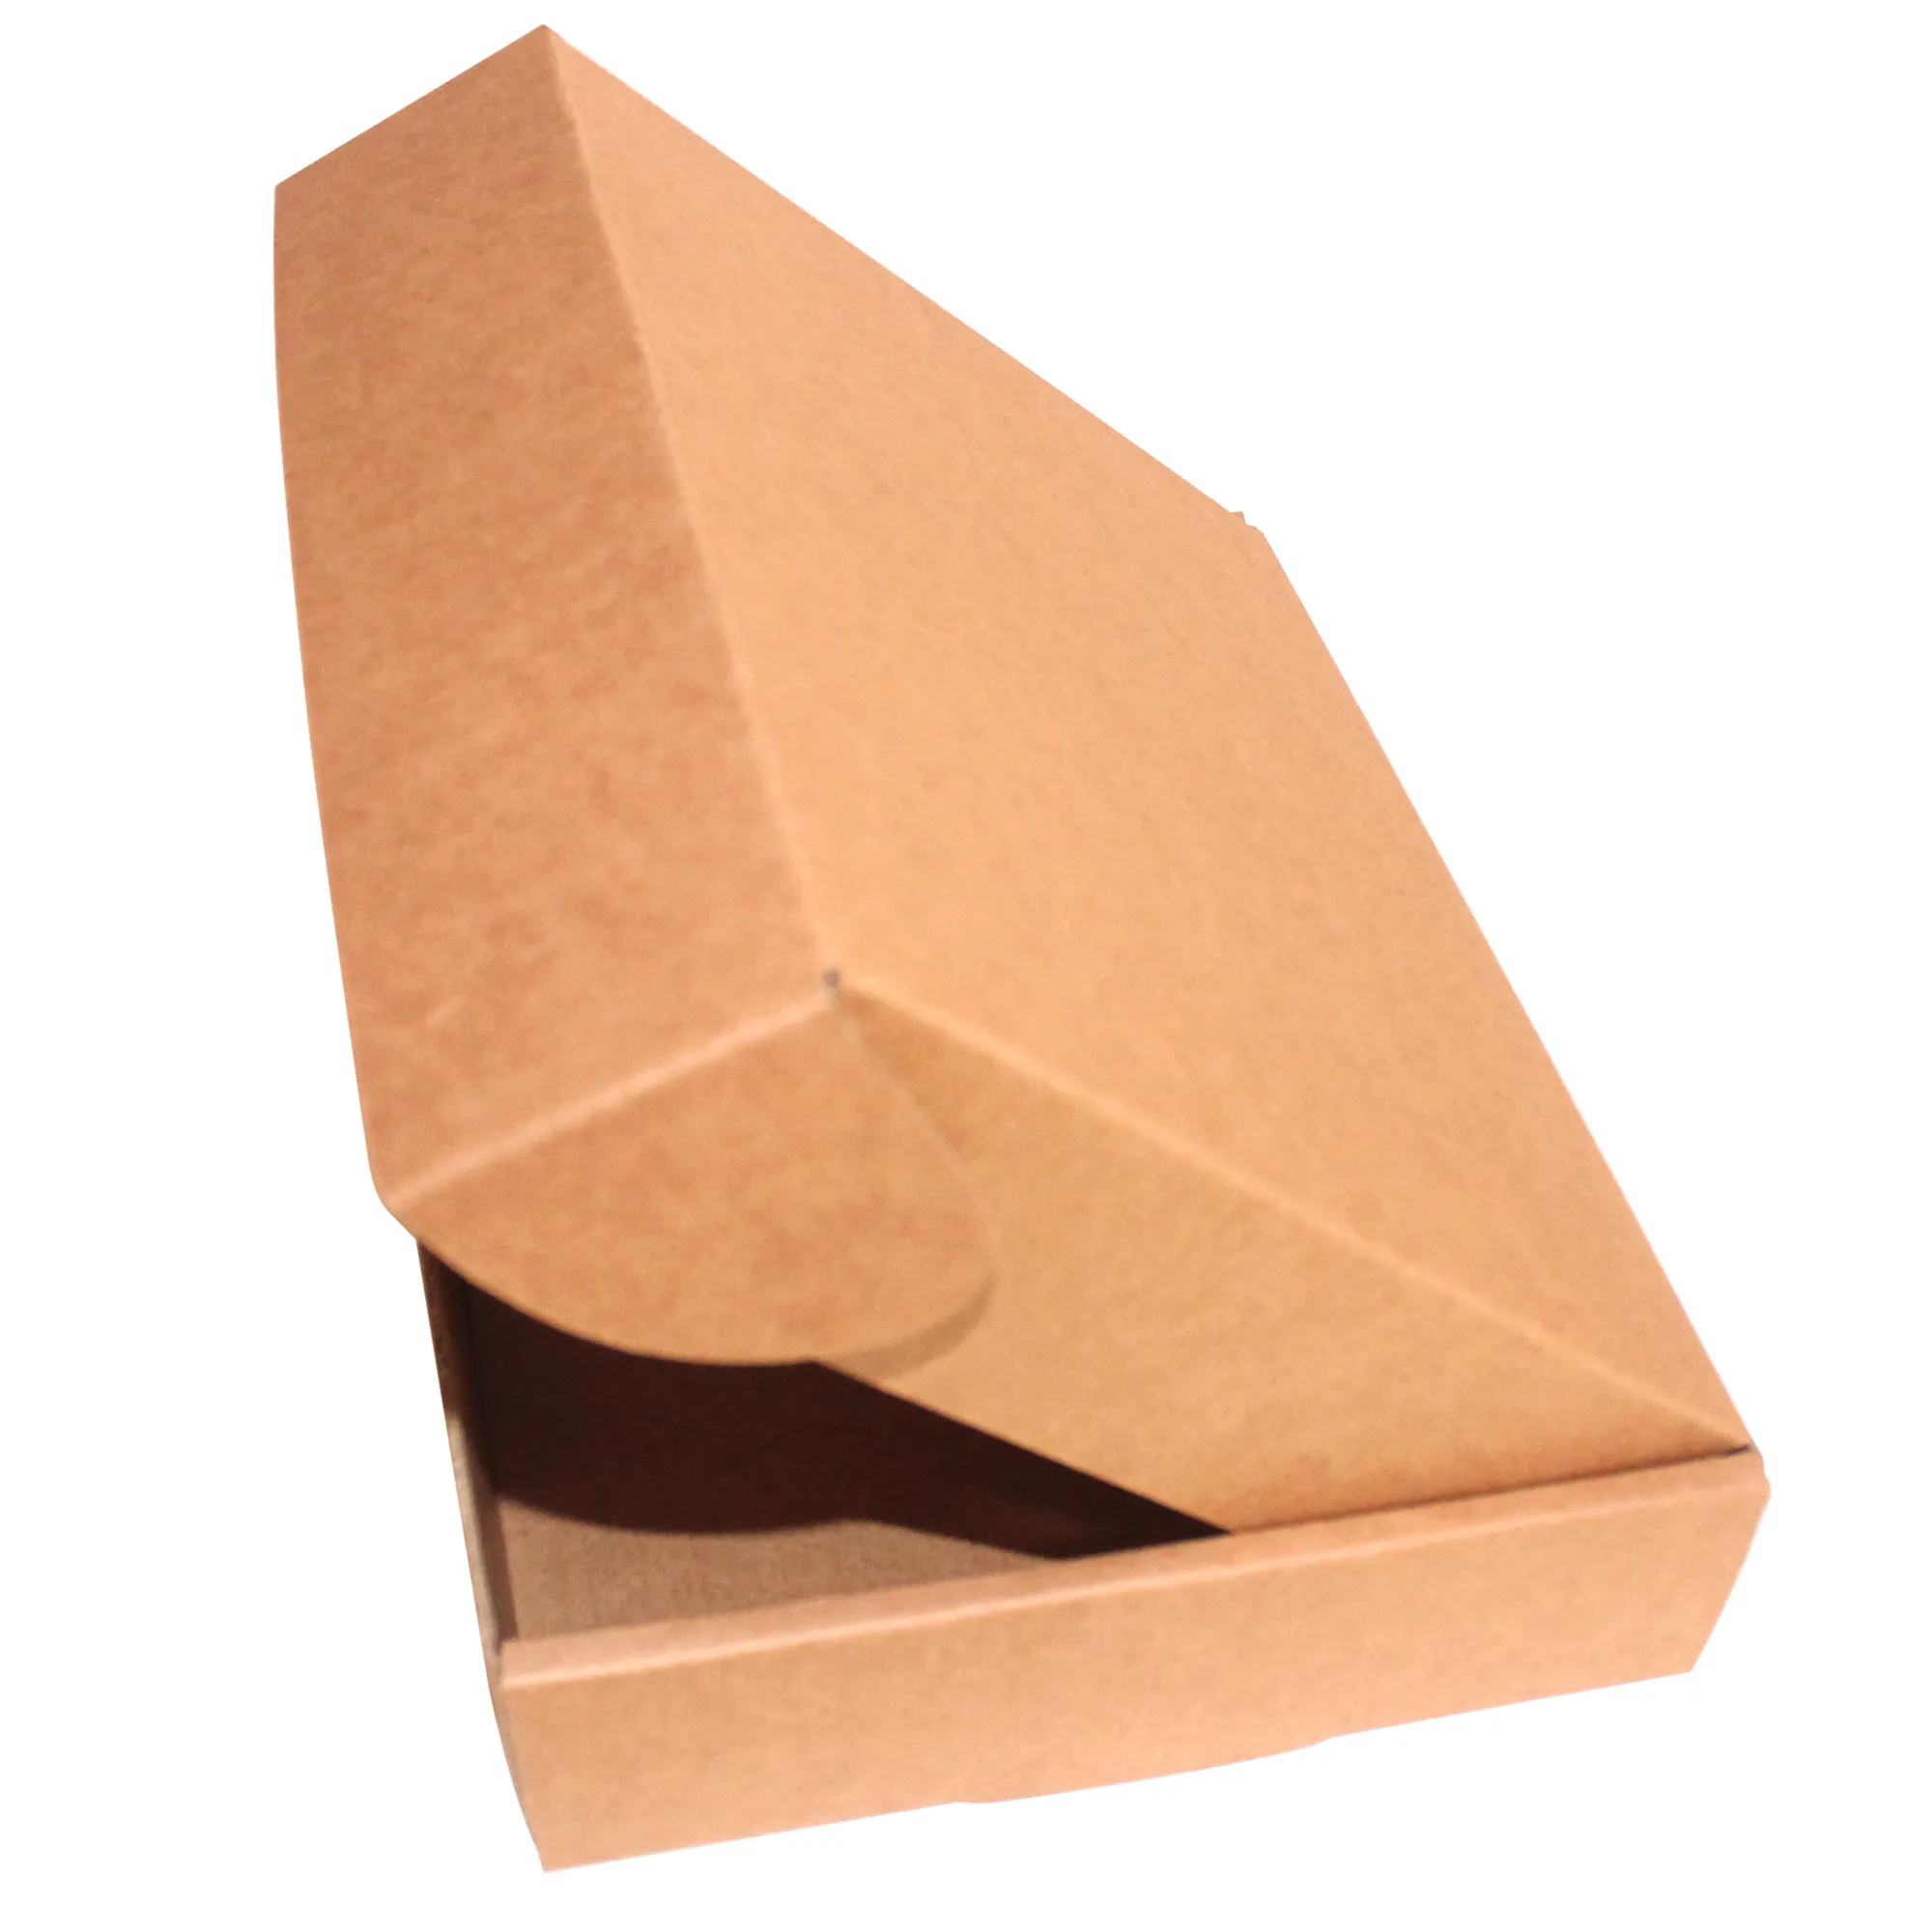 Spot sale wholesale high quality Corrugated mailing boxes Brown Kraft Paper Shipping BoxRecycled mailer box